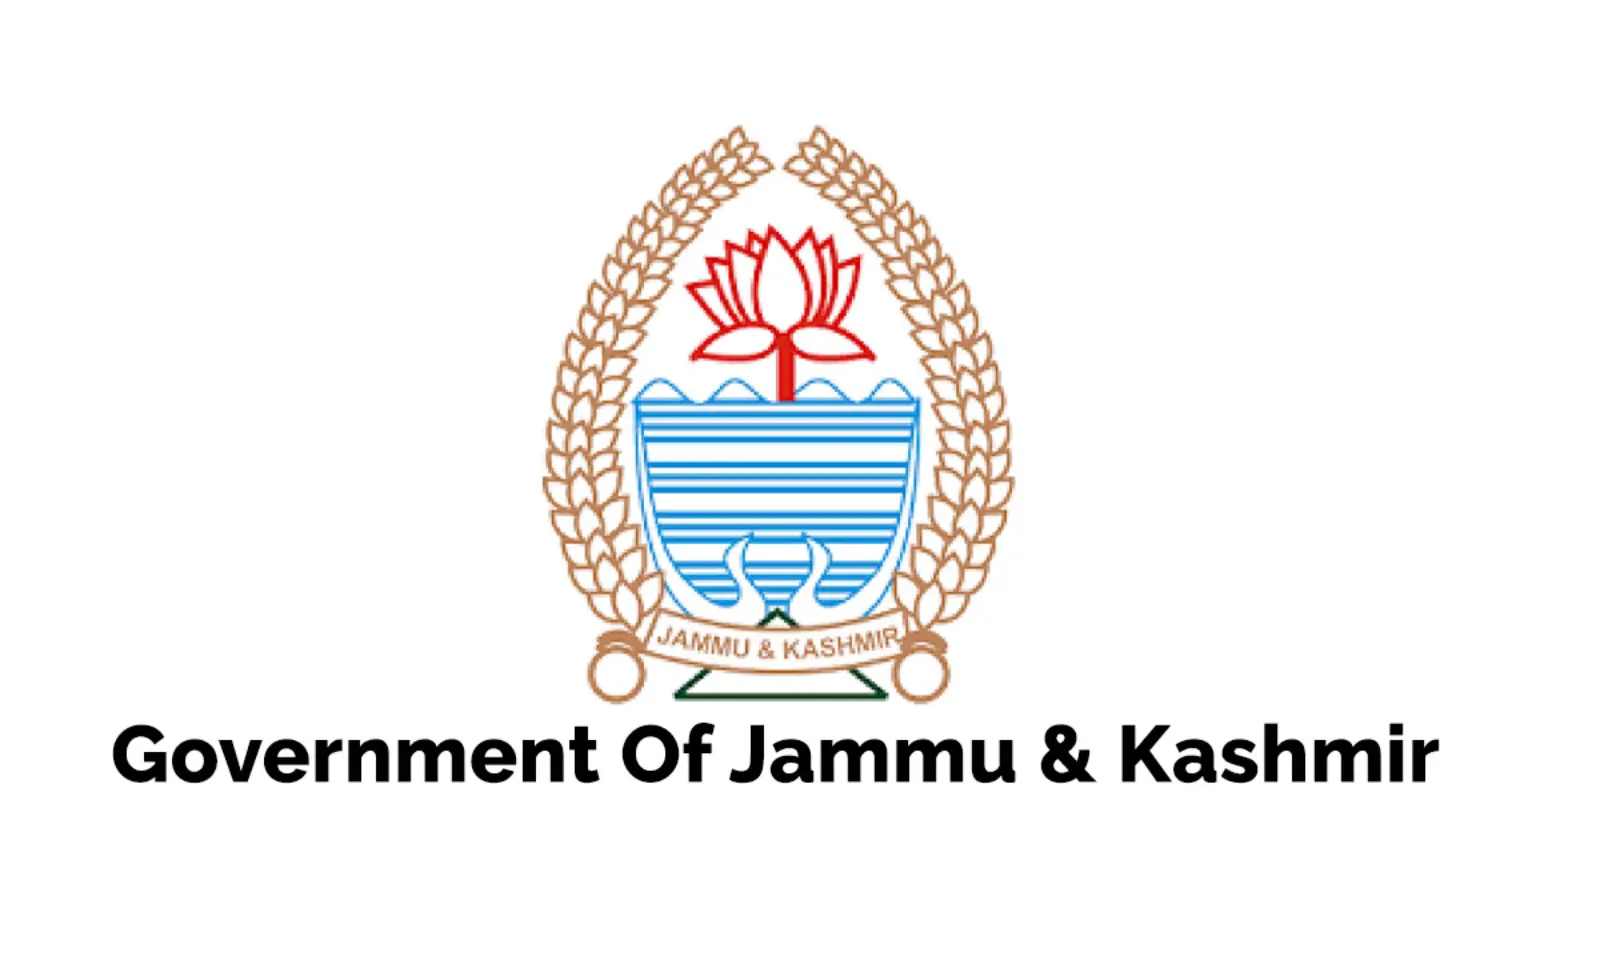 The-Jammu-and-Kashmir-Government-issues-directives-to-Sub-Registrars-to-ensure-compliance-with-rules-governing-e-stamp-certificates